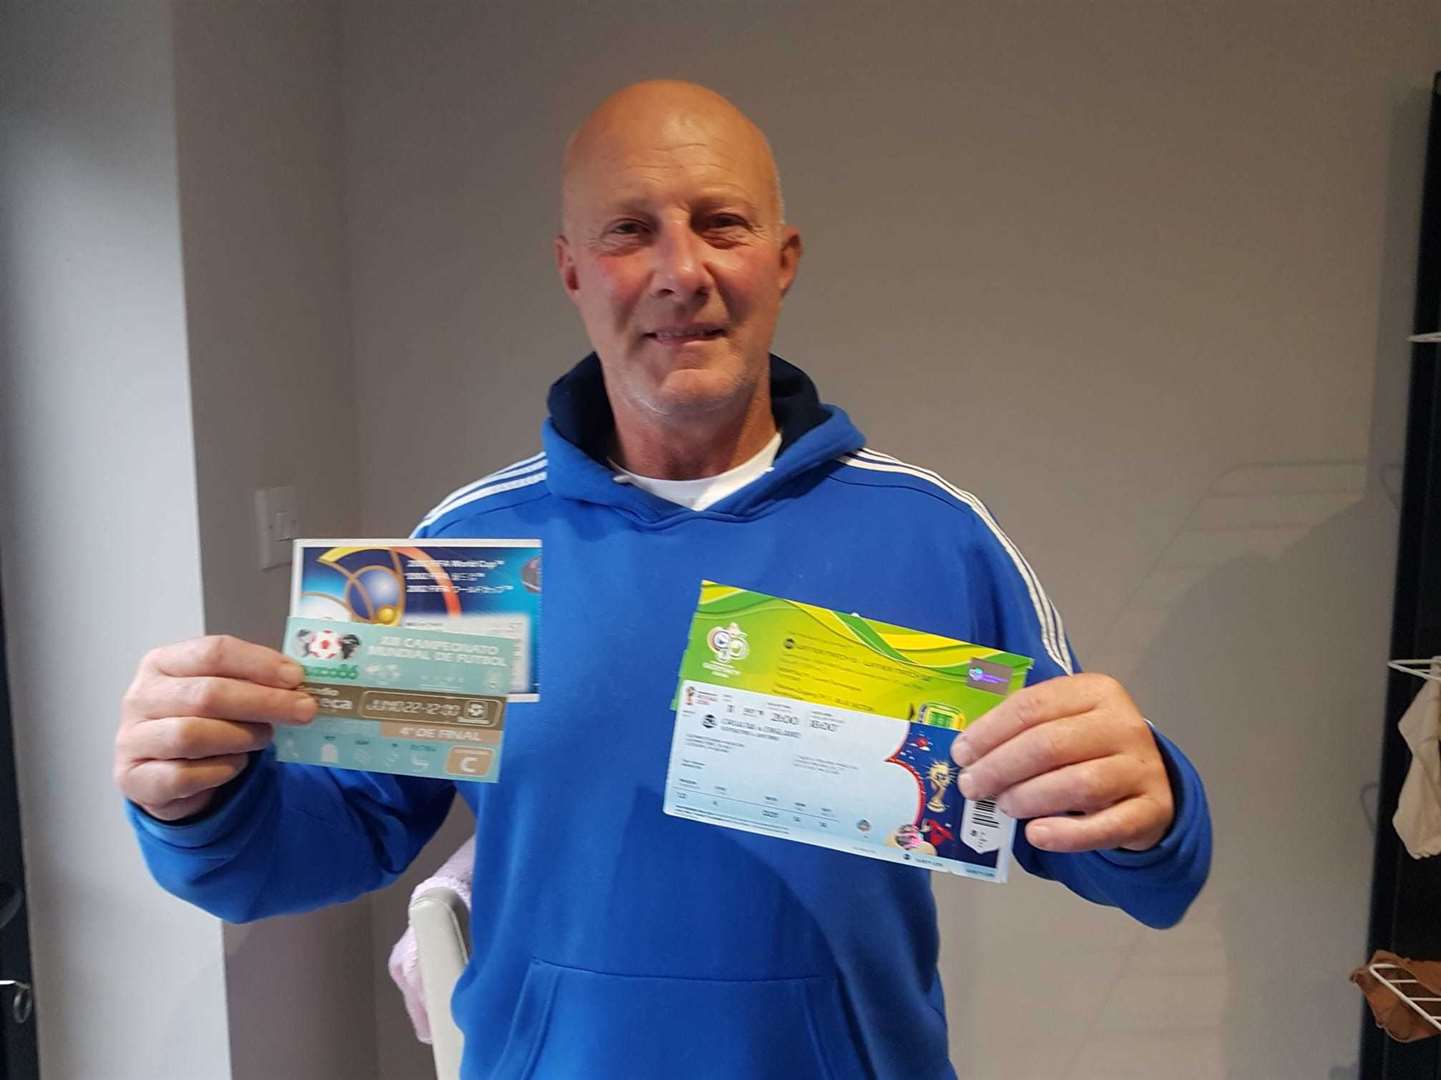 Terry Matson with some of his World Cup tickets over the years, including the Mexico '86 quarter-final against Argentina and the Russia 2018 semi-final versus Croatia